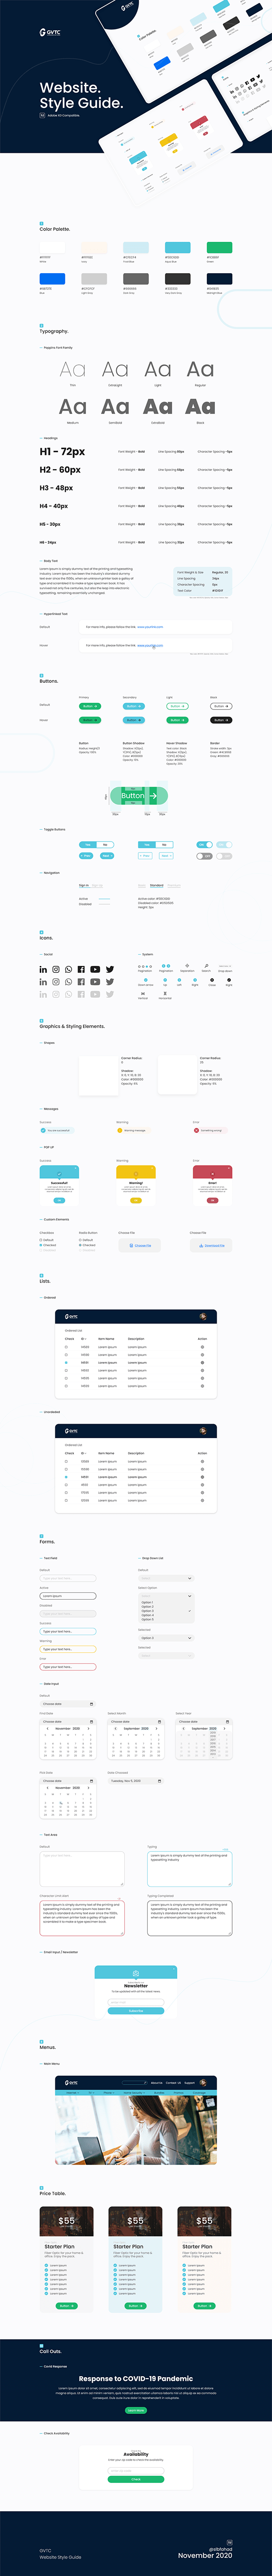 Website UI Style Guide